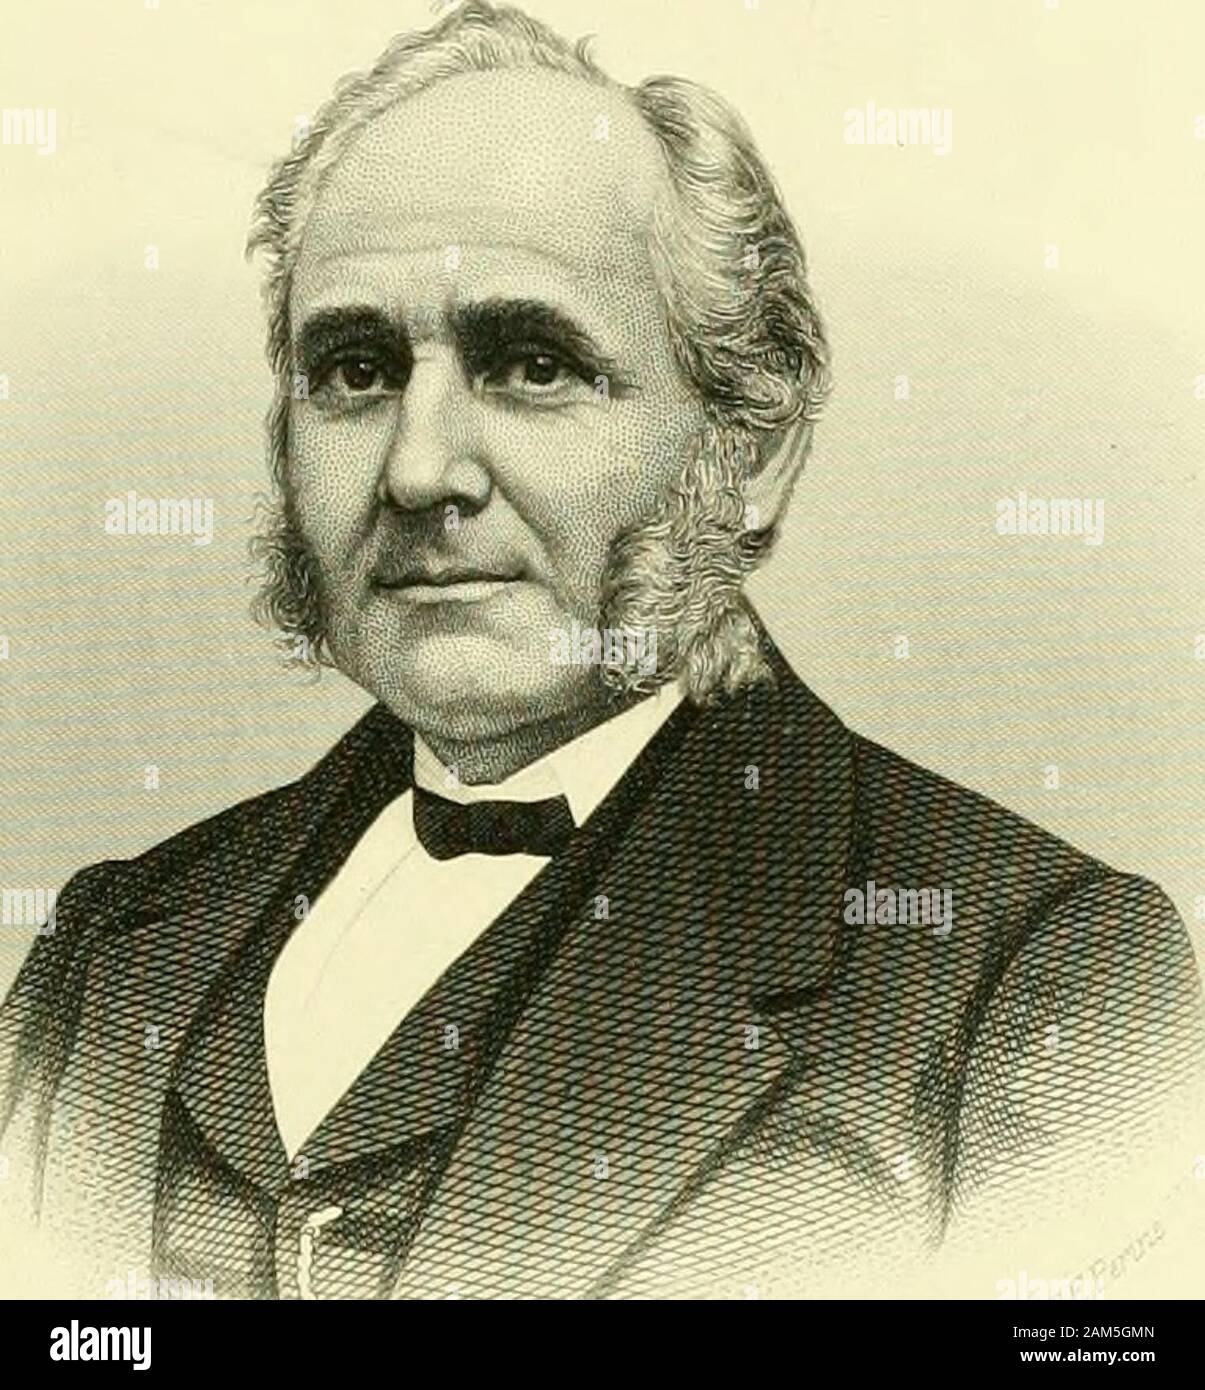 Boston of to-day; a glance at its history and characteristicsWith biographical sketches and portraits of many of its professional and business men . panywas incorporated under the title — The CieorgeF. Blake Manufacturing Company, with George F.ISlake as president. In 1879 it purchased thelarge plant of the Knowles Steam-pipe Company,at Warren, Mass., thus greatly extending its facili-ties. It was, however, found necessary in 1890 toremove the Boston manufactory to East Cambridge,where extensive works were erected, covering fouracres, with a main building of four hundred feetlong by one hundre Stock Photo